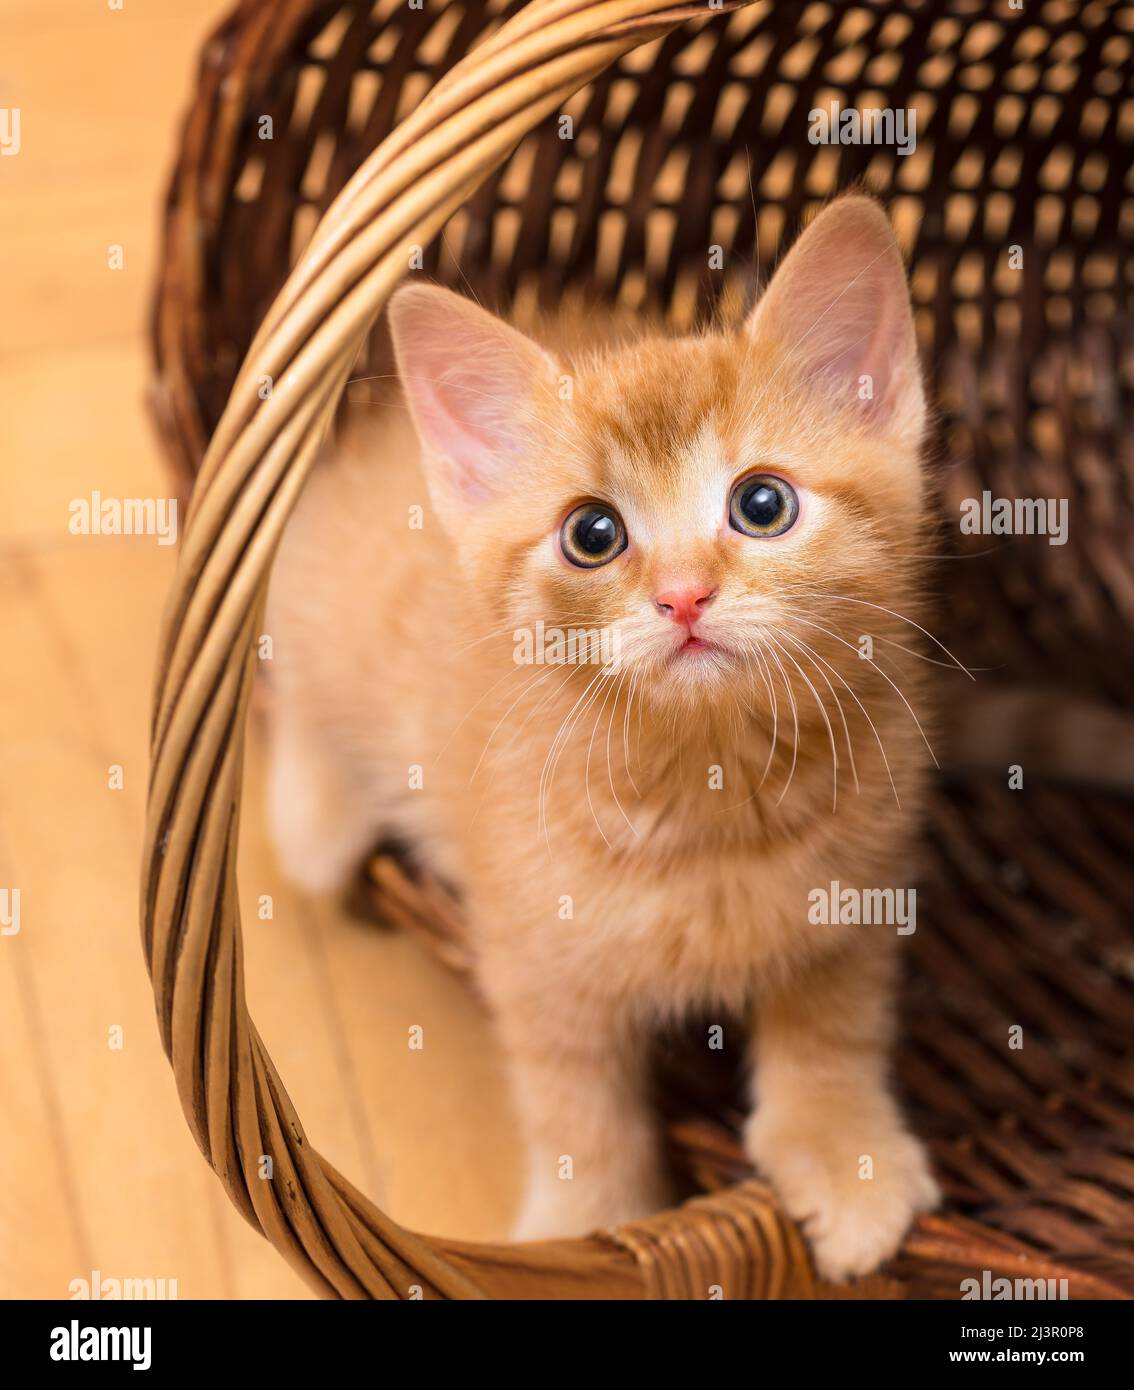 Cute timid ginger tabby kitten standing in tumbled wicker basket. House cat. Felis silvestris catus. Closeup a beautiful curious kitty with wide eyes. Stock Photo